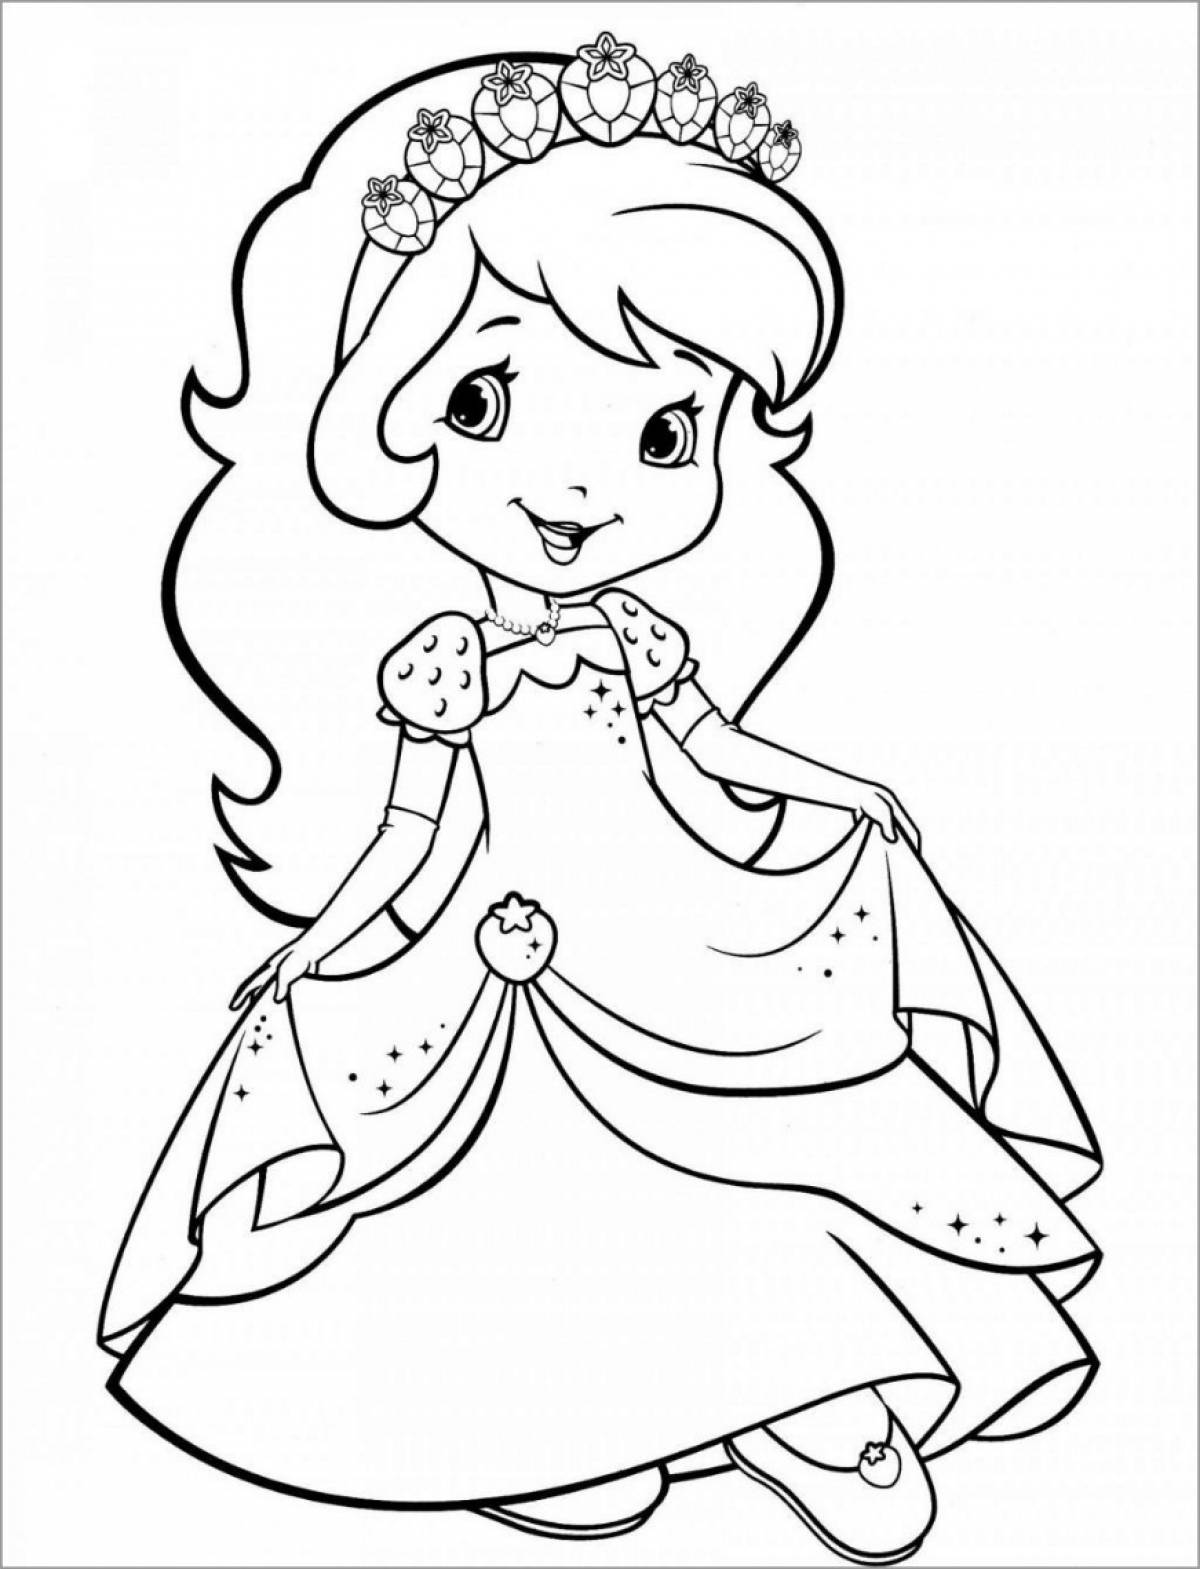 Majestic princess coloring book for girls